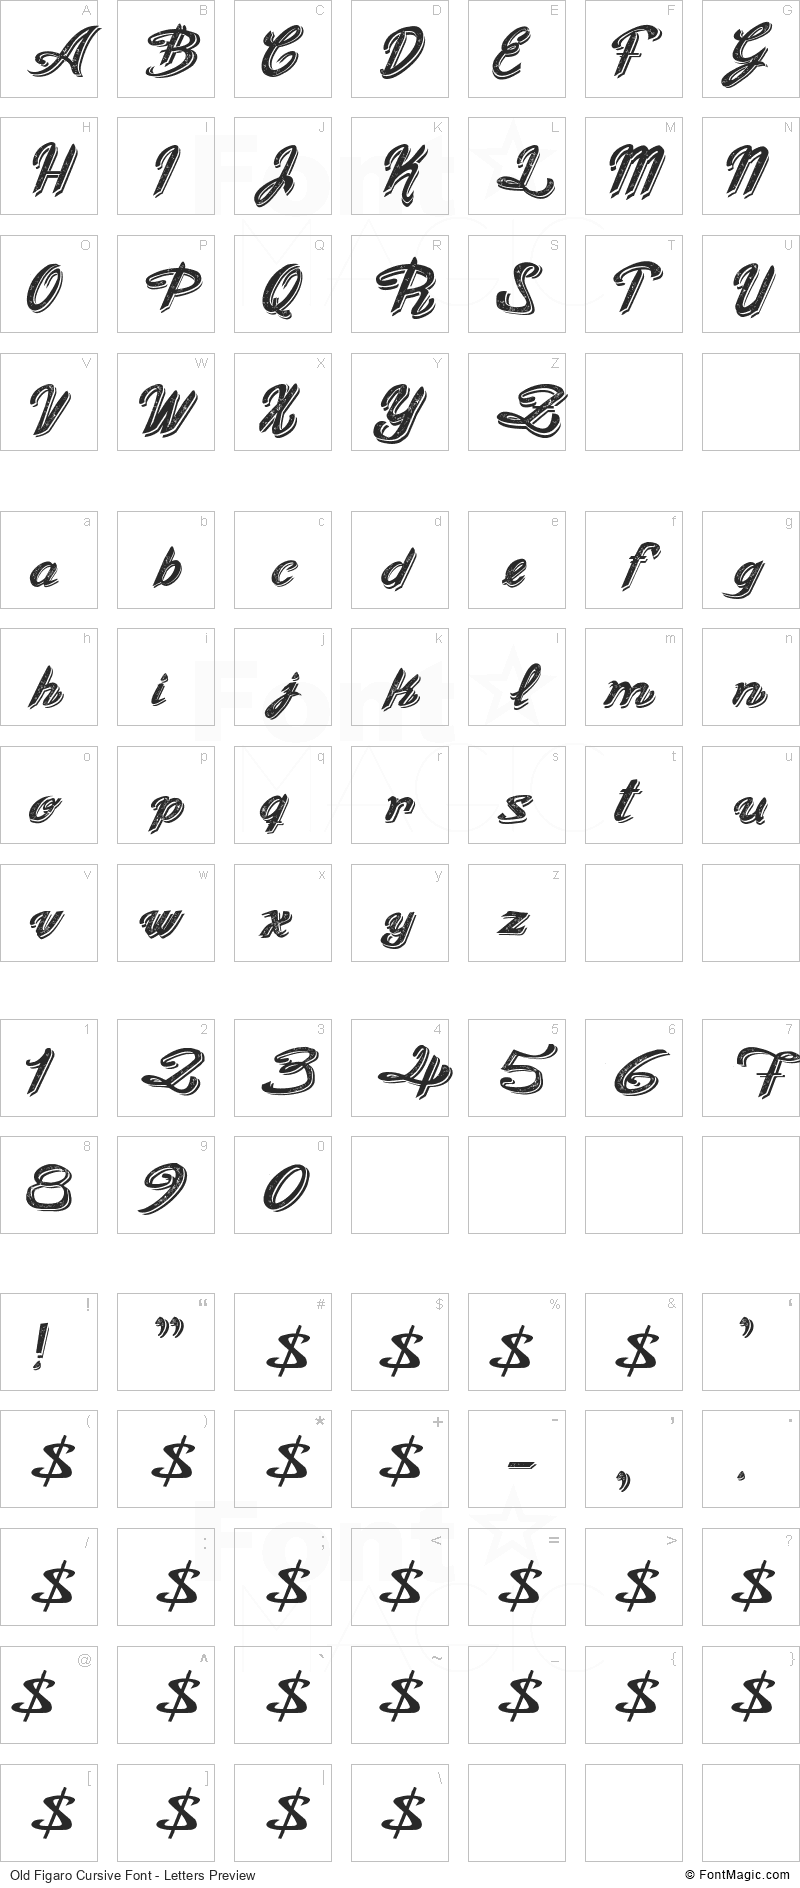 Old Figaro Cursive Font - All Latters Preview Chart